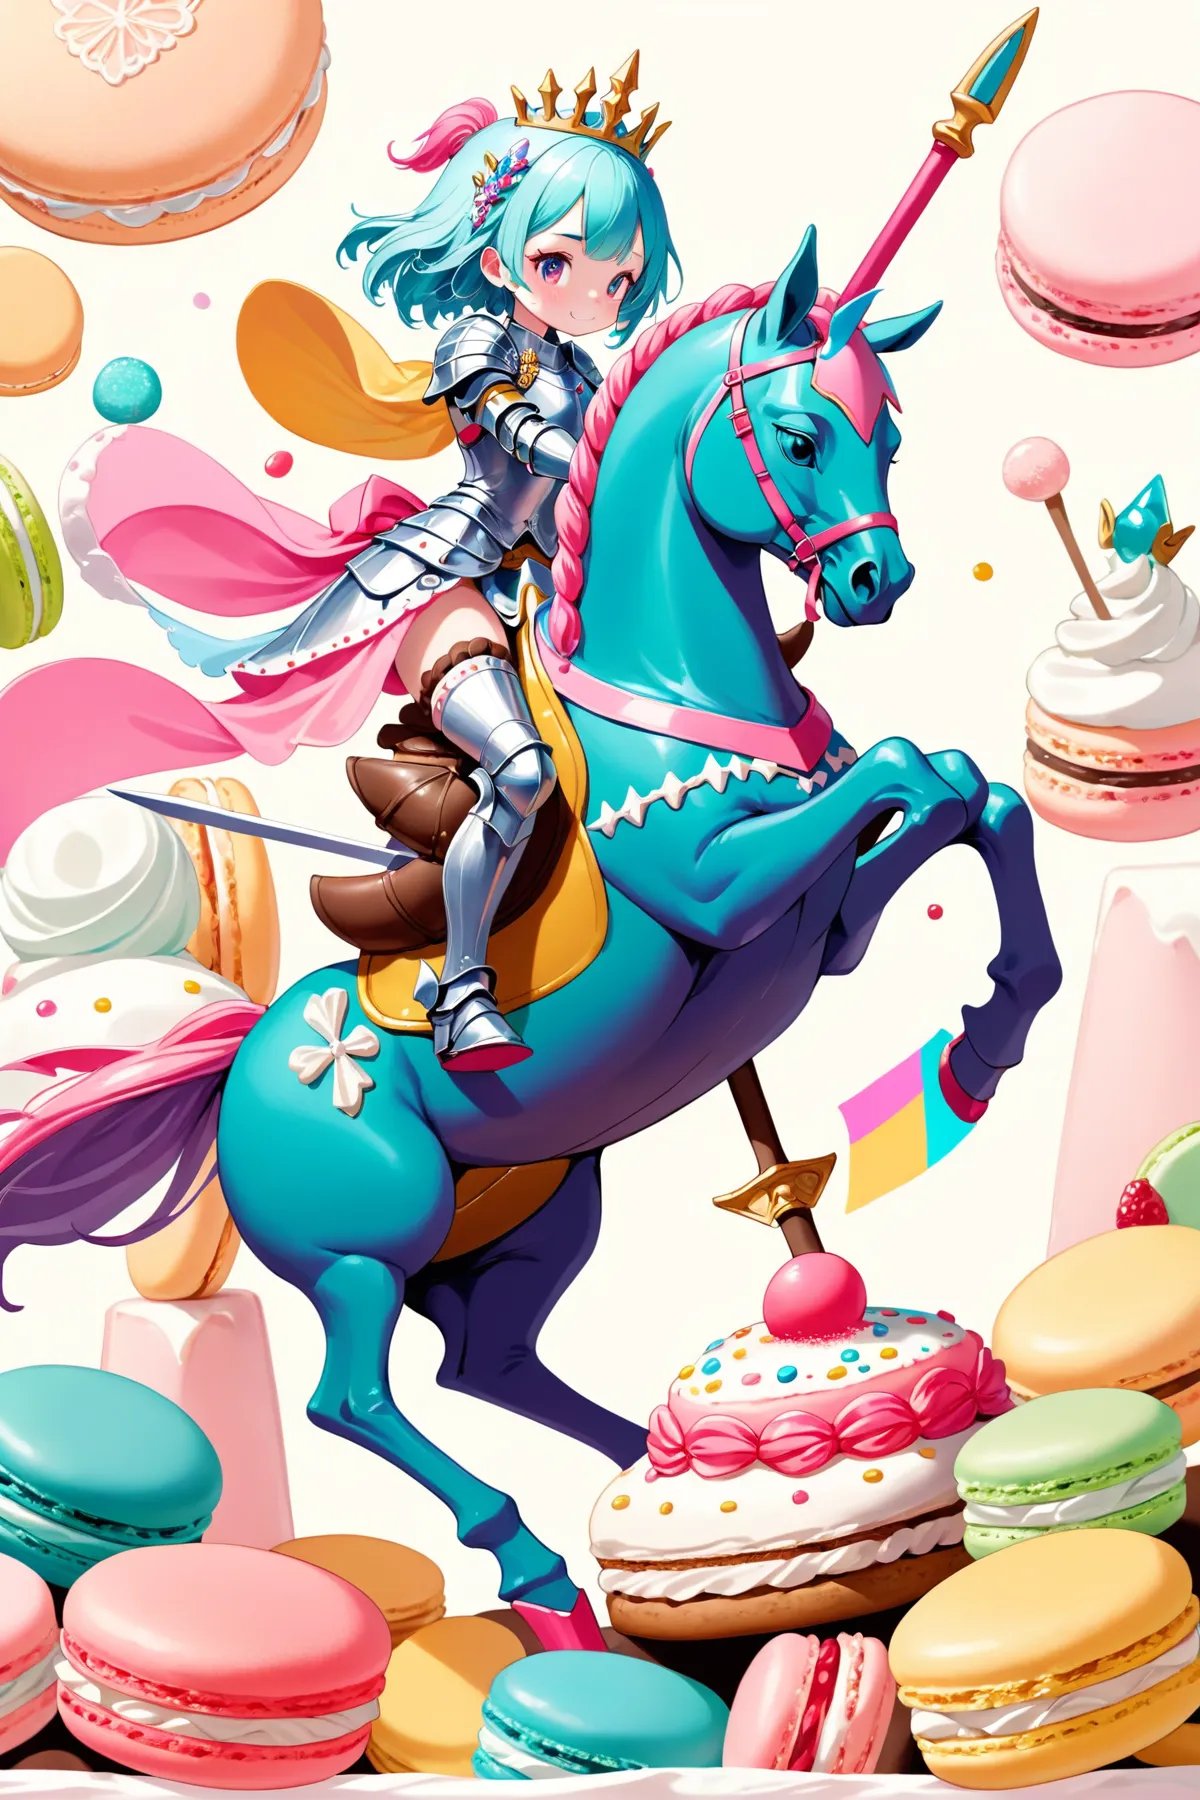 {Illustration} of a determined female knight riding a majestic macaron steed through a whimsical and colorful pastry kingdom, brandishing a frosting sword while wearing a macaron-inspired armor decorated with delicate sugar crystals.